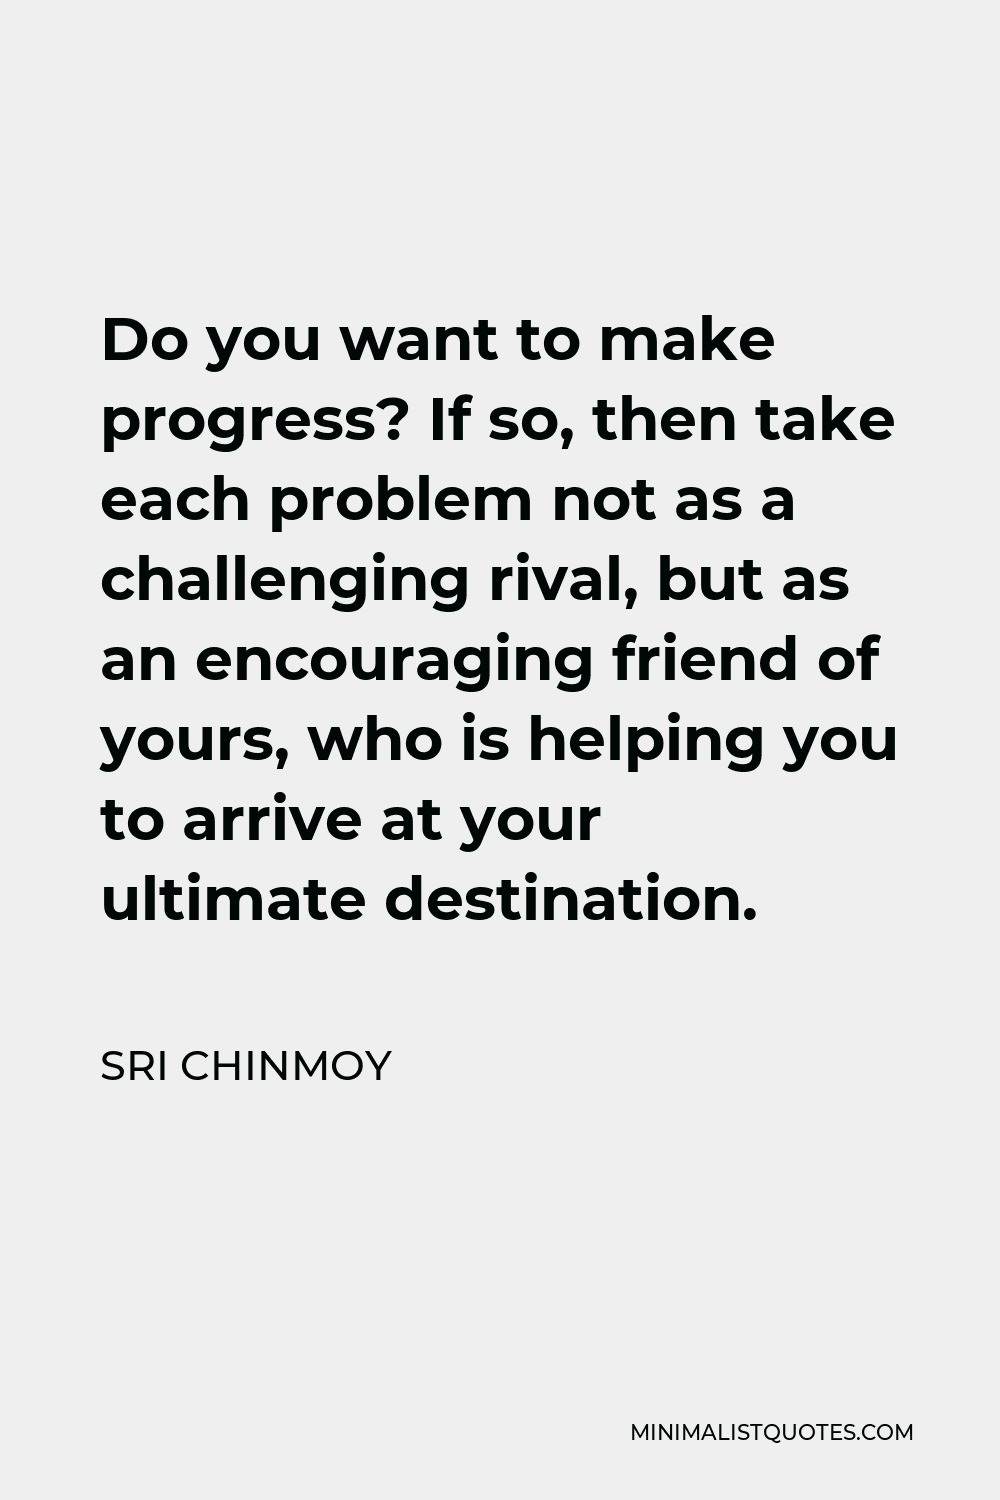 Sri Chinmoy Quote - Do you want to make progress? If so, then take each problem not as a challenging rival, but as an encouraging friend of yours, who is helping you to arrive at your ultimate destination.